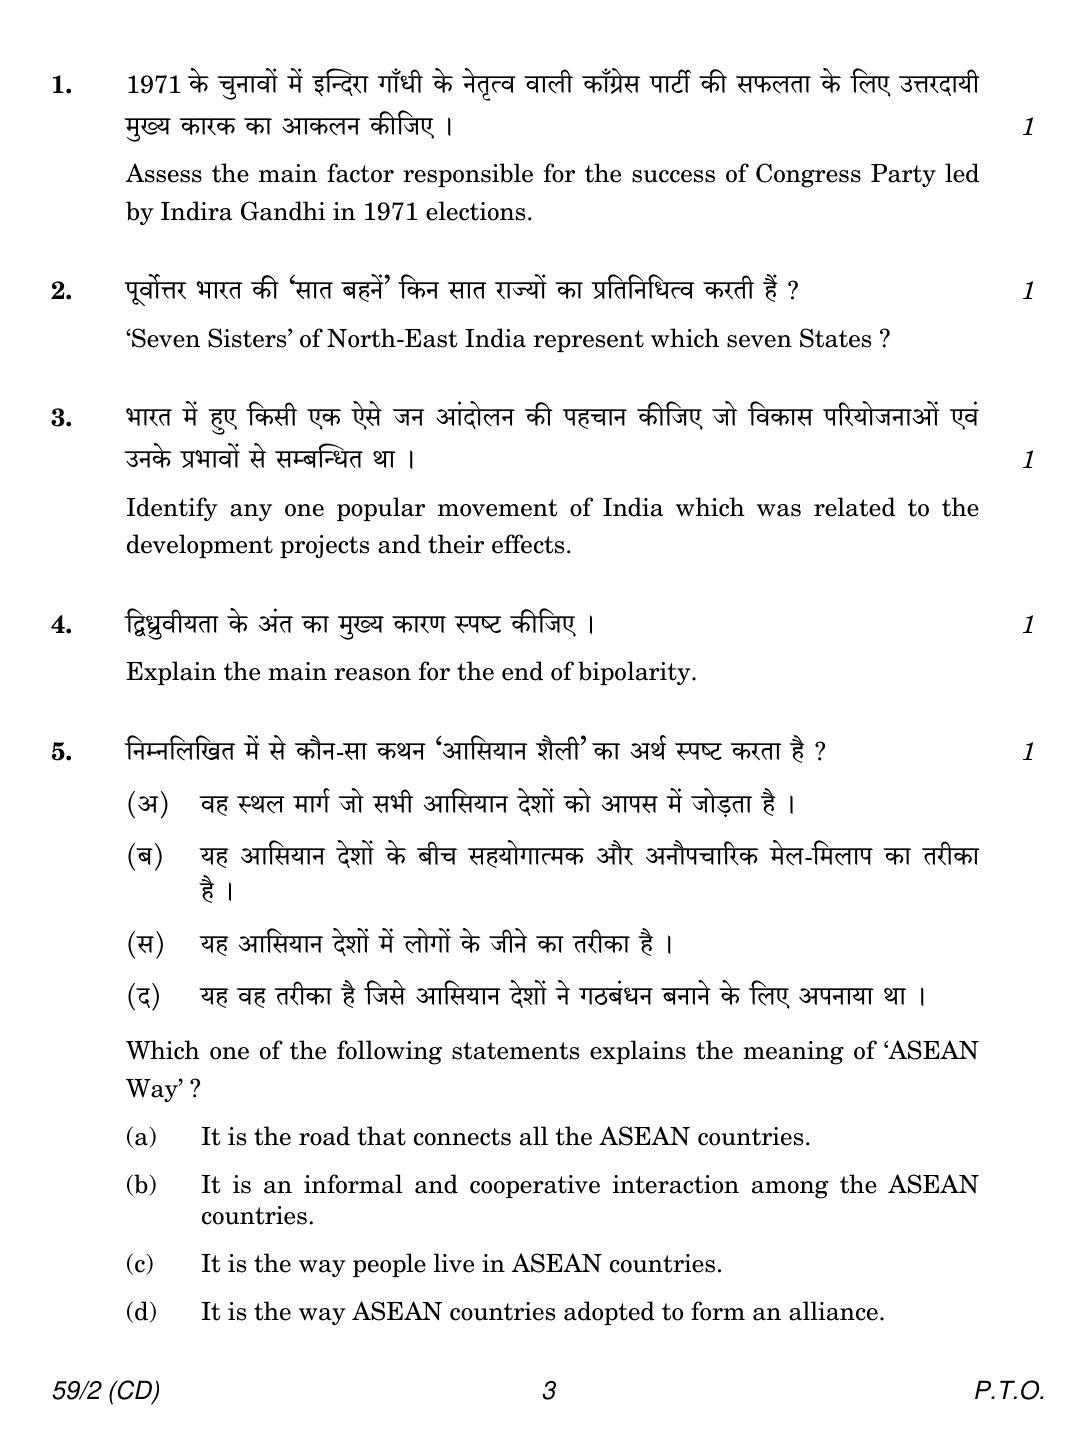 CBSE Class 12 59-2 POLITICAL SCIENCE CD 2018 Question Paper - Page 3